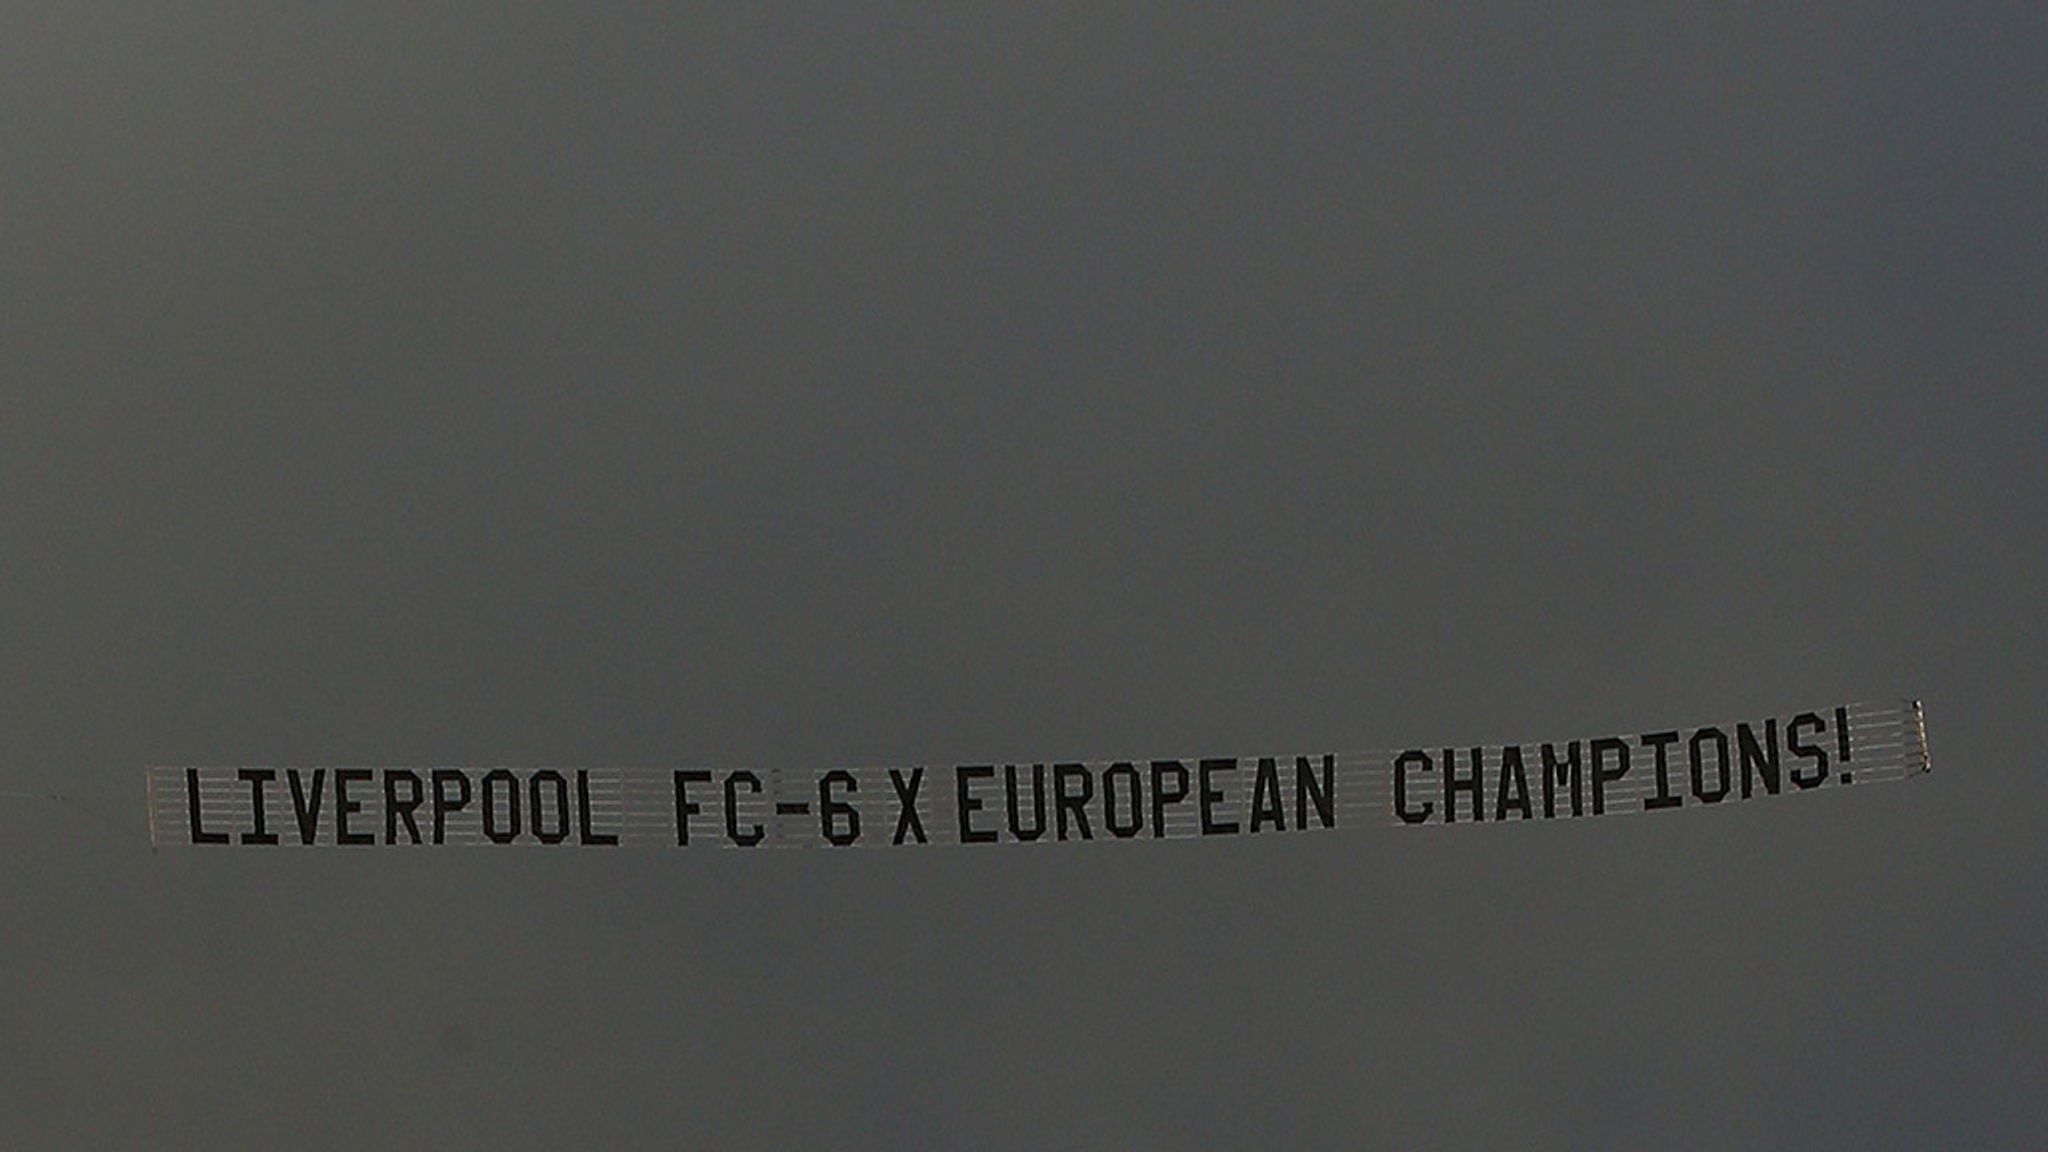 Liverpool Unveil Champions League Banner At Manchester United